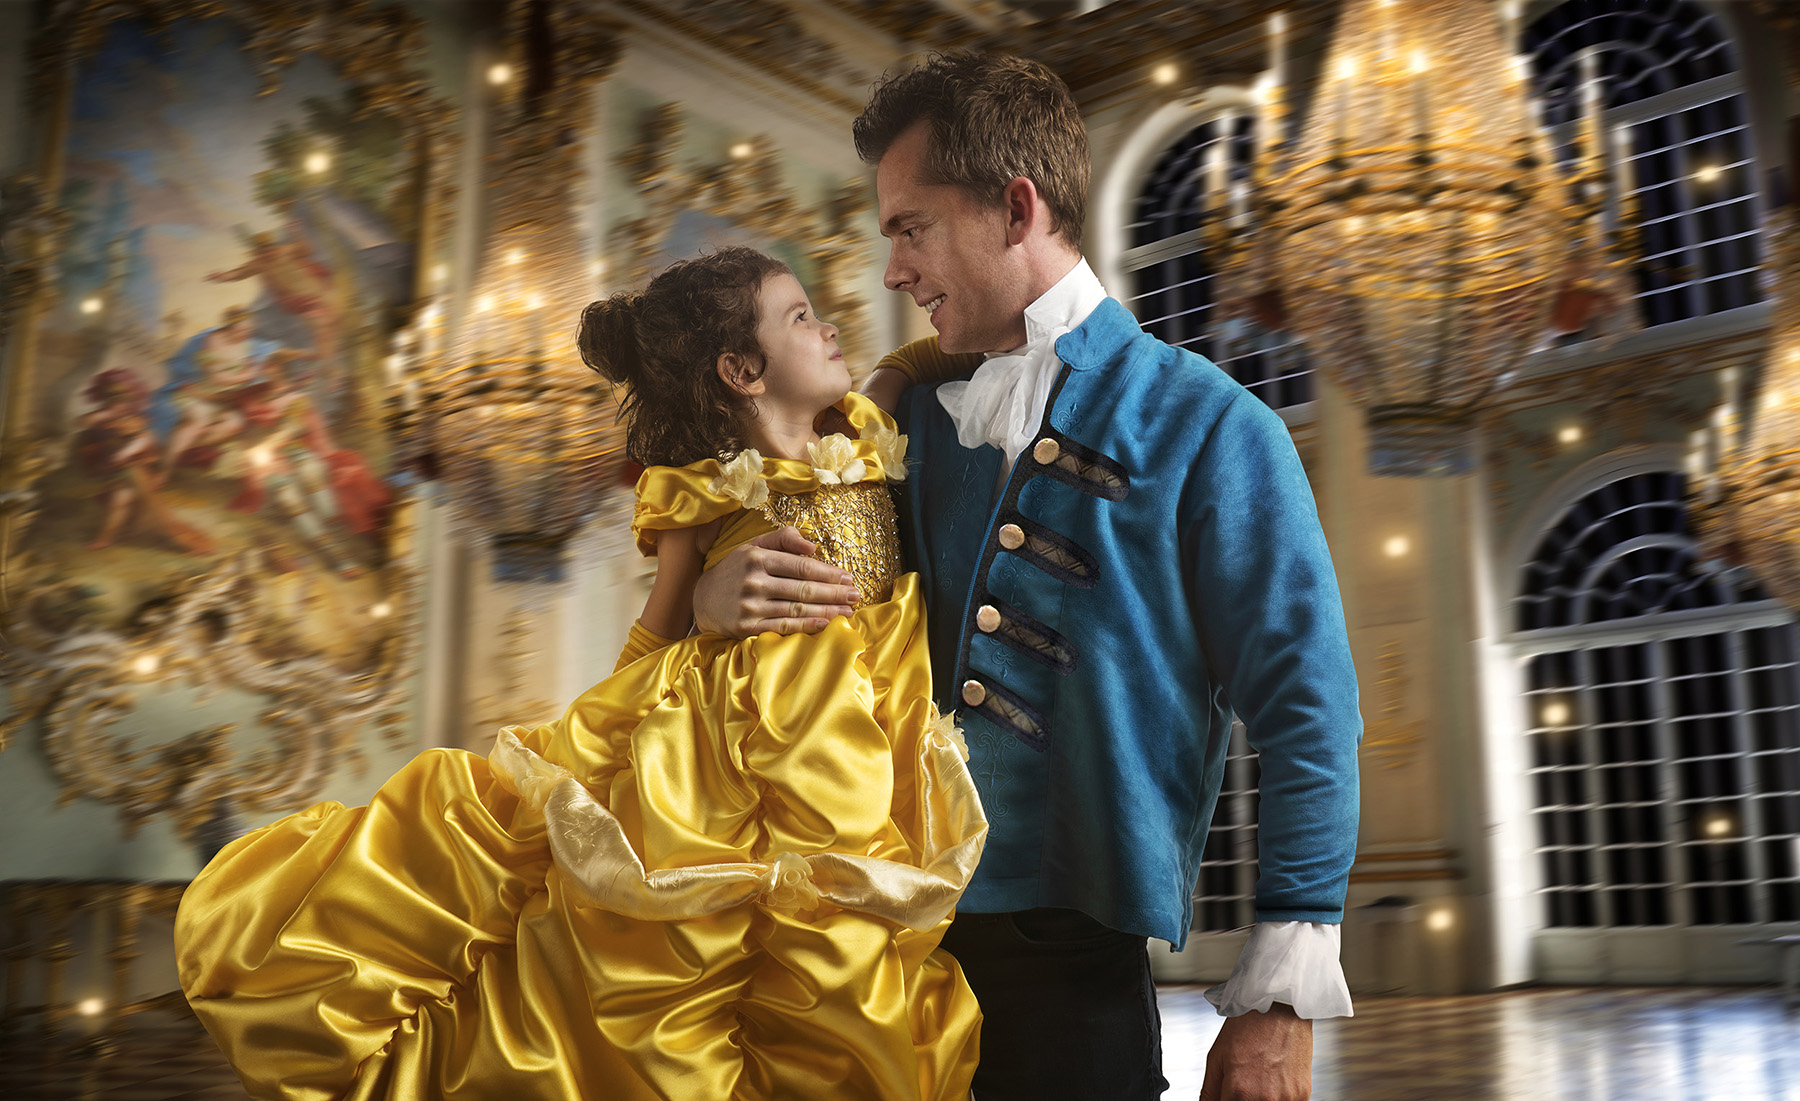 PHOTO: Commercial photographer Josh Rossi gave his daughter, Nellee,  a magical "Beauty and the Beast" photo shoot she'd cherish forever.